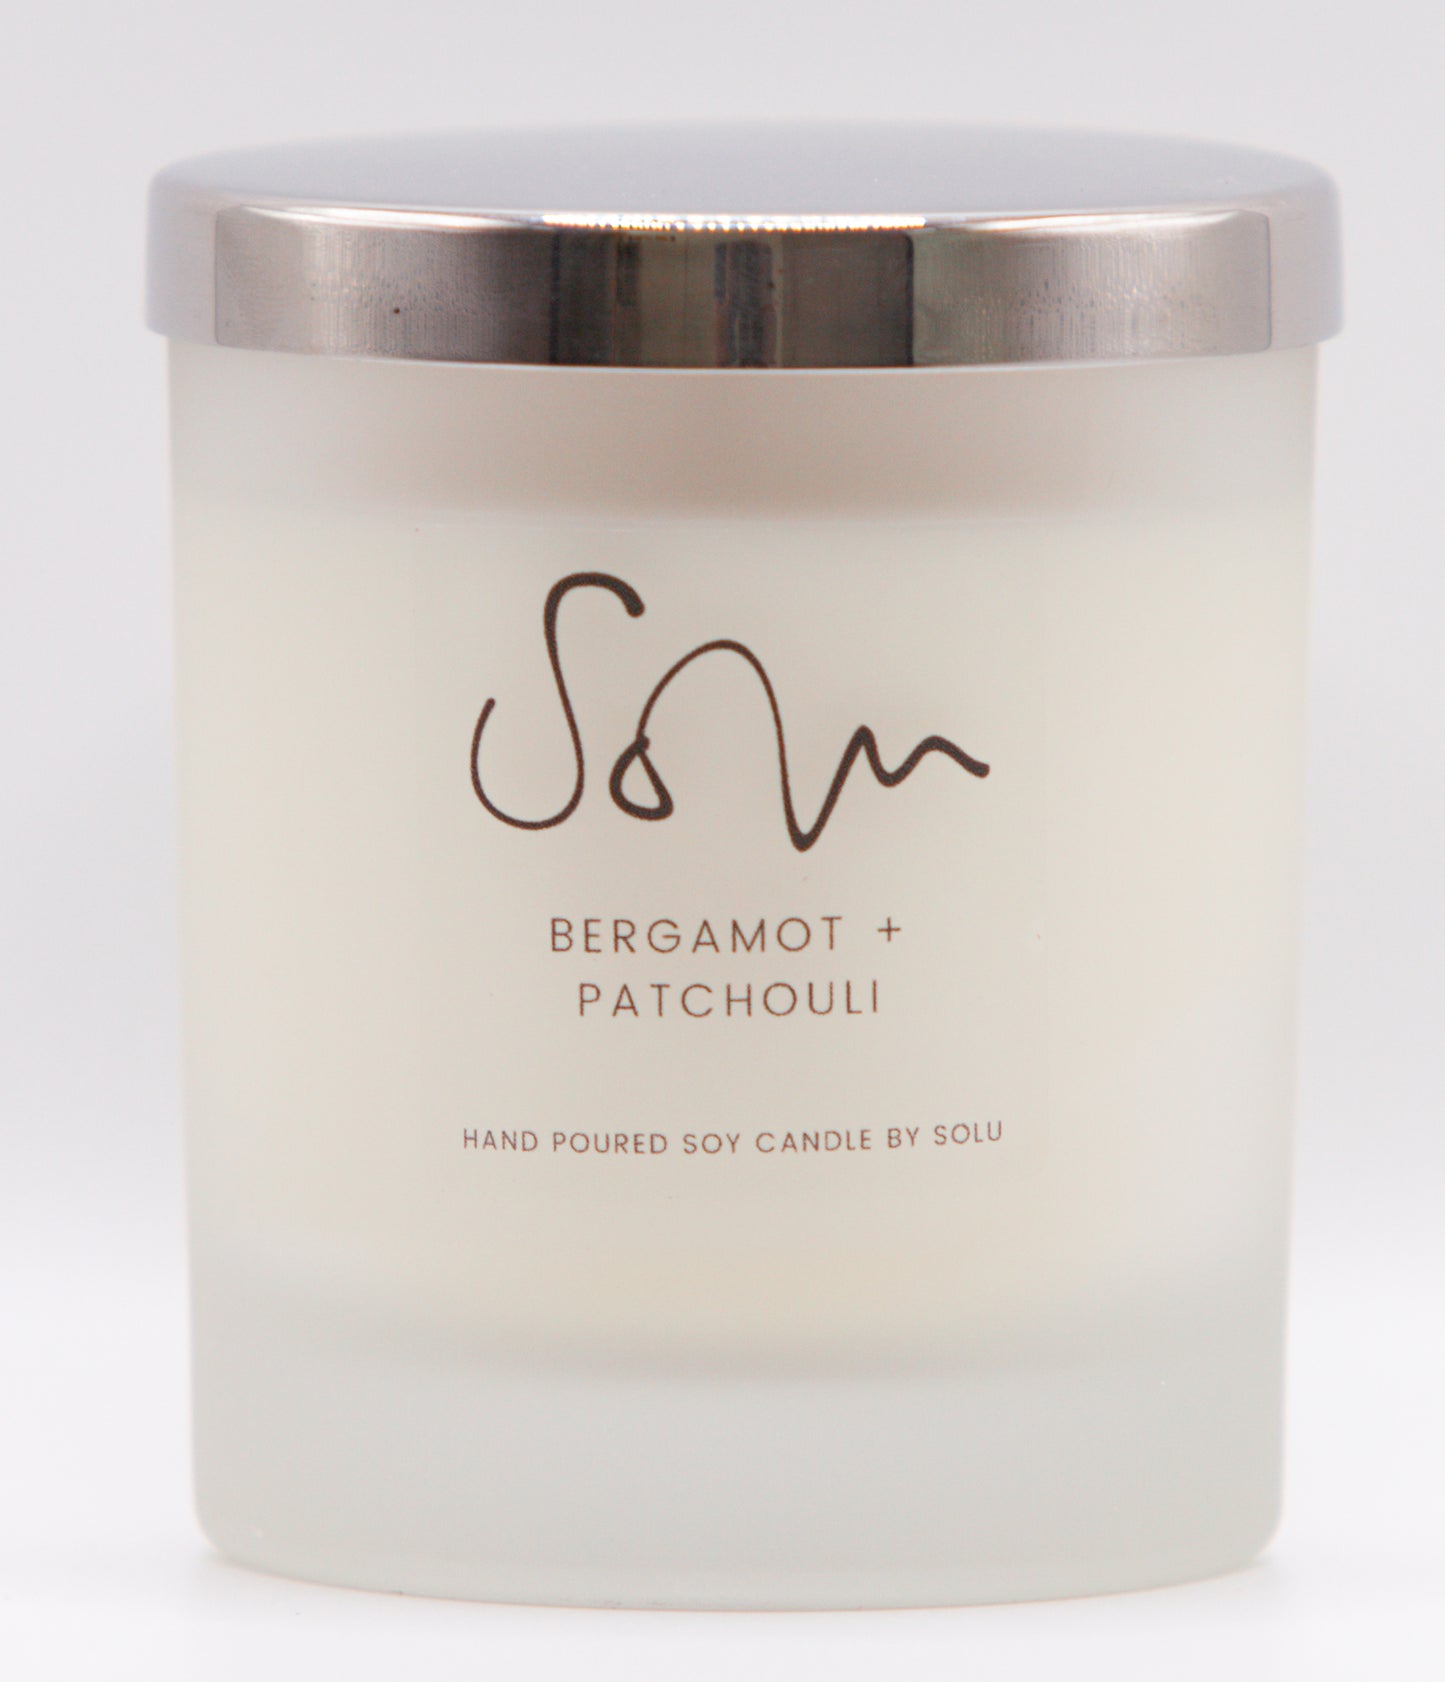 Bergamot and Patchouli Soy Wax Candle - Solu Candles